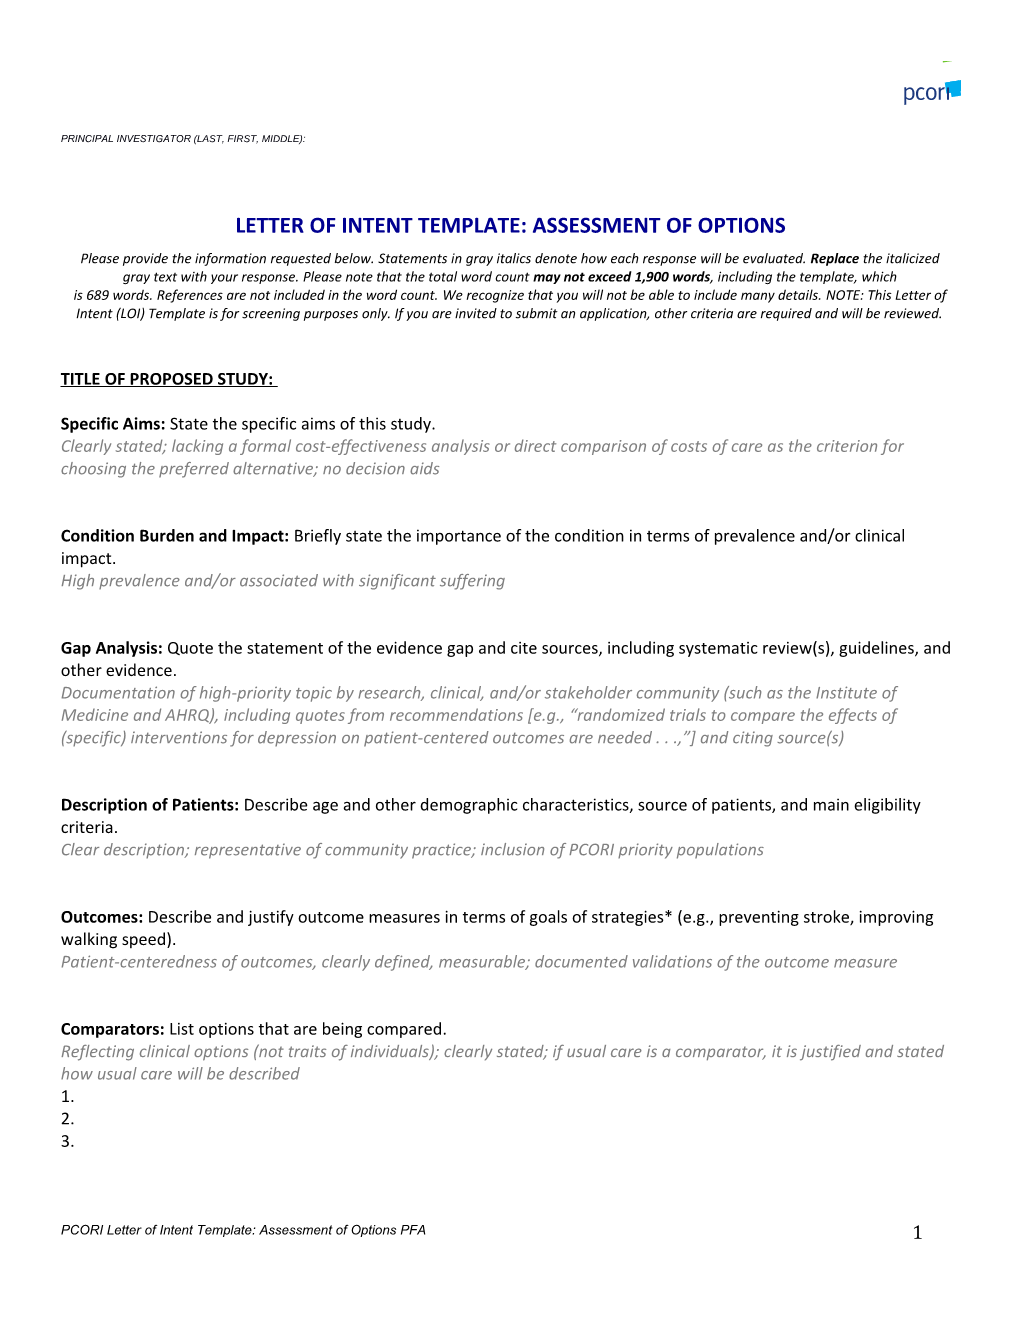 Letter of Intent Template: Assessment of Options